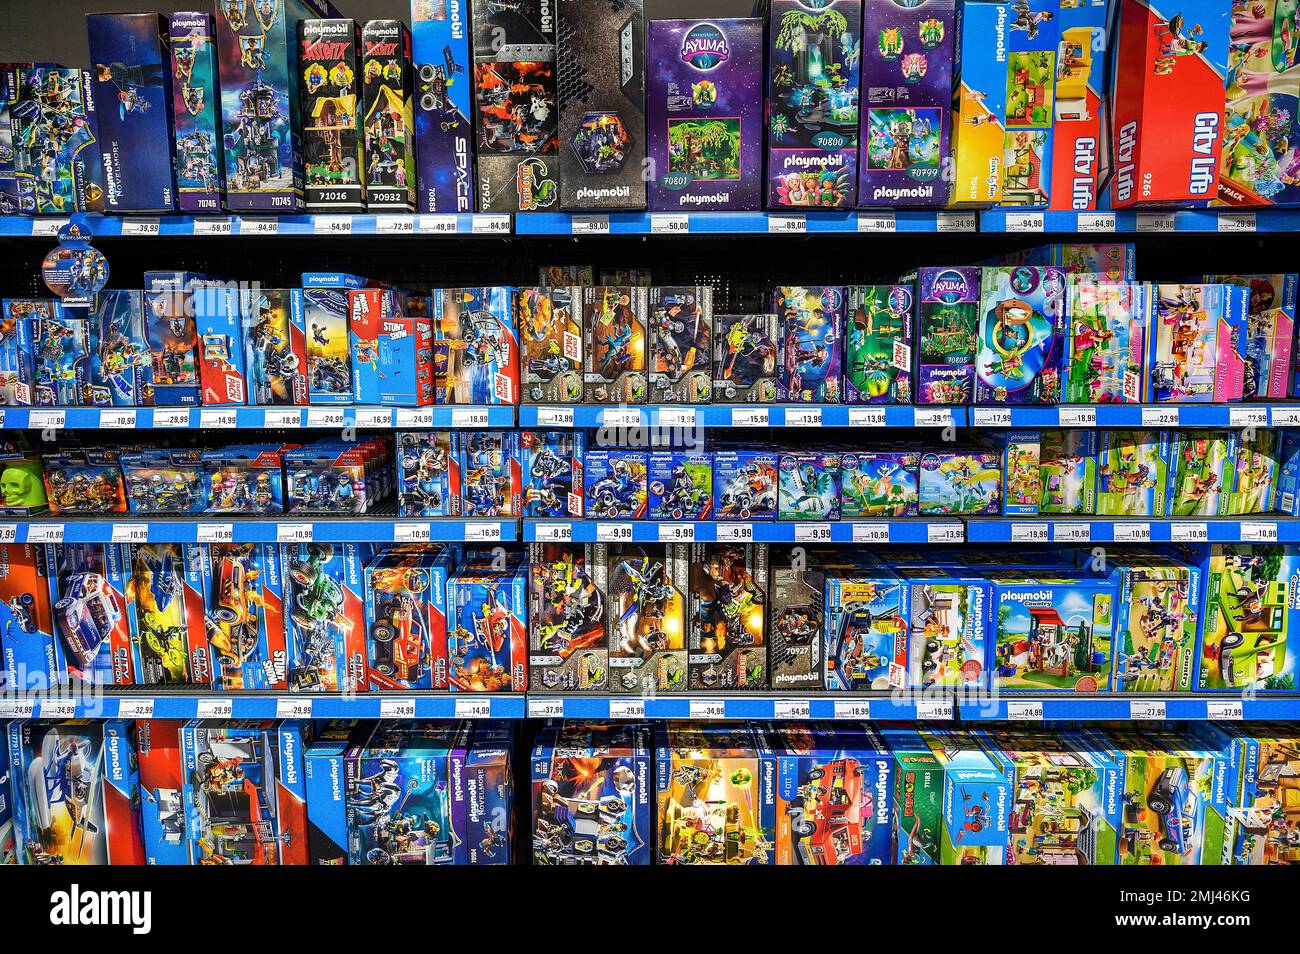 Shelf with Playmobil system toys in the wholesale market, Bavaria, Germany Stock Photo